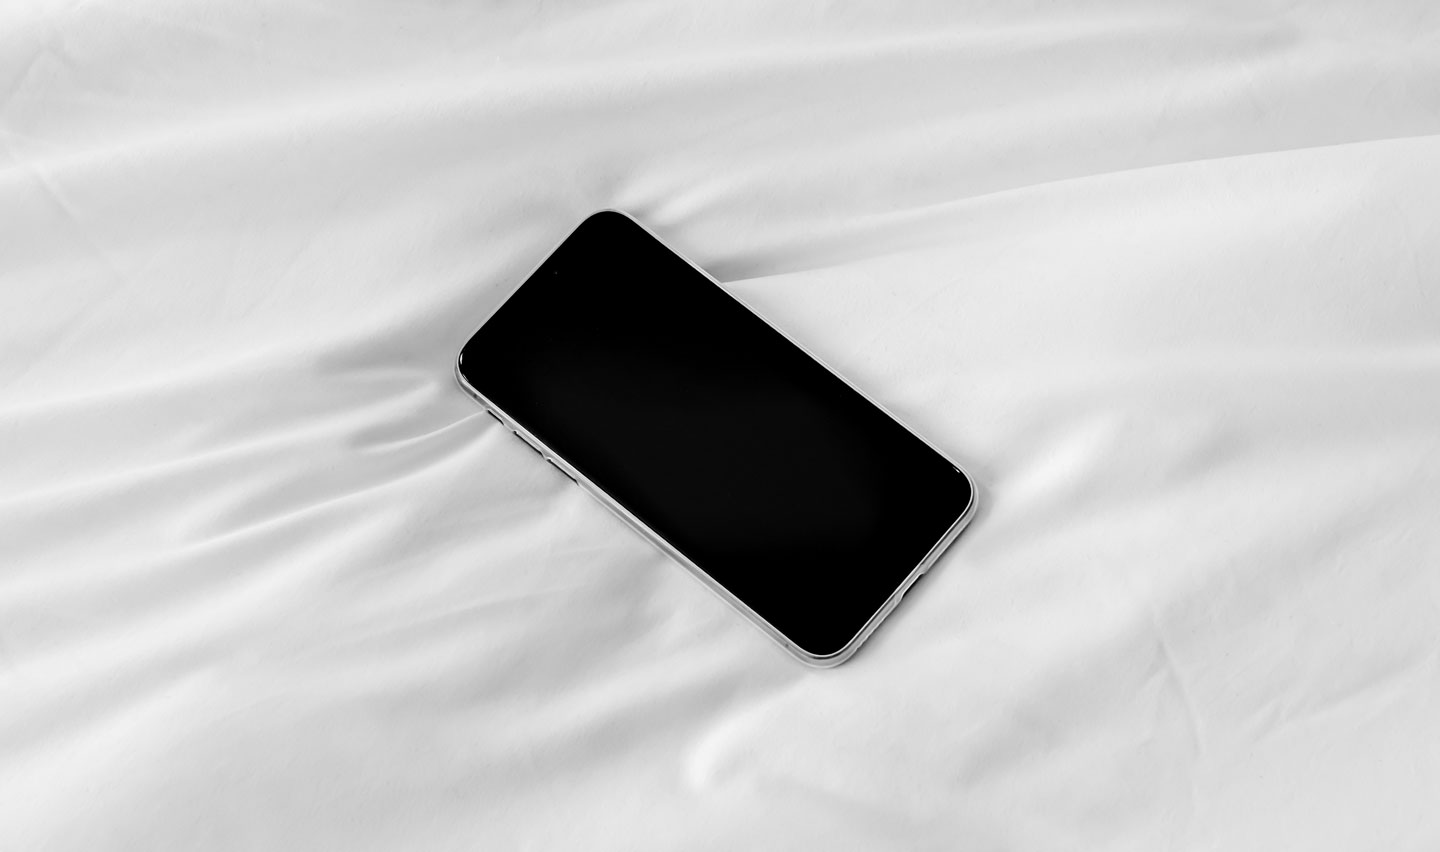 15 Best Sleep Apps You Should Know in 2019